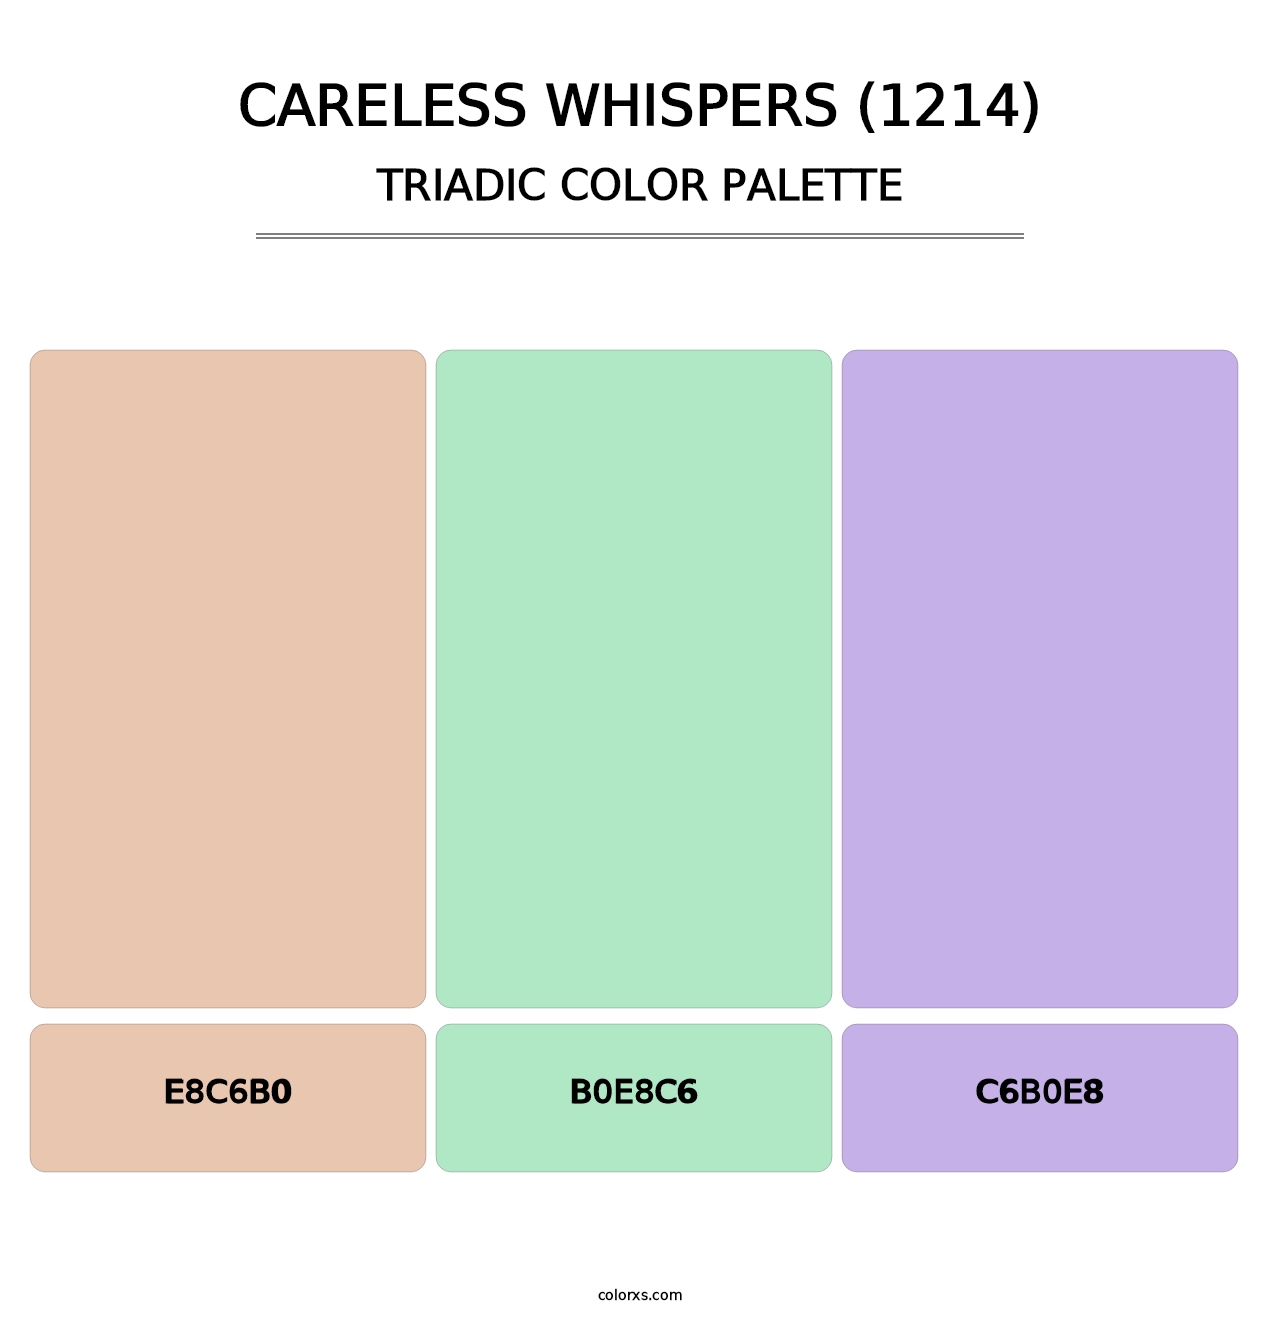 Careless Whispers (1214) - Triadic Color Palette